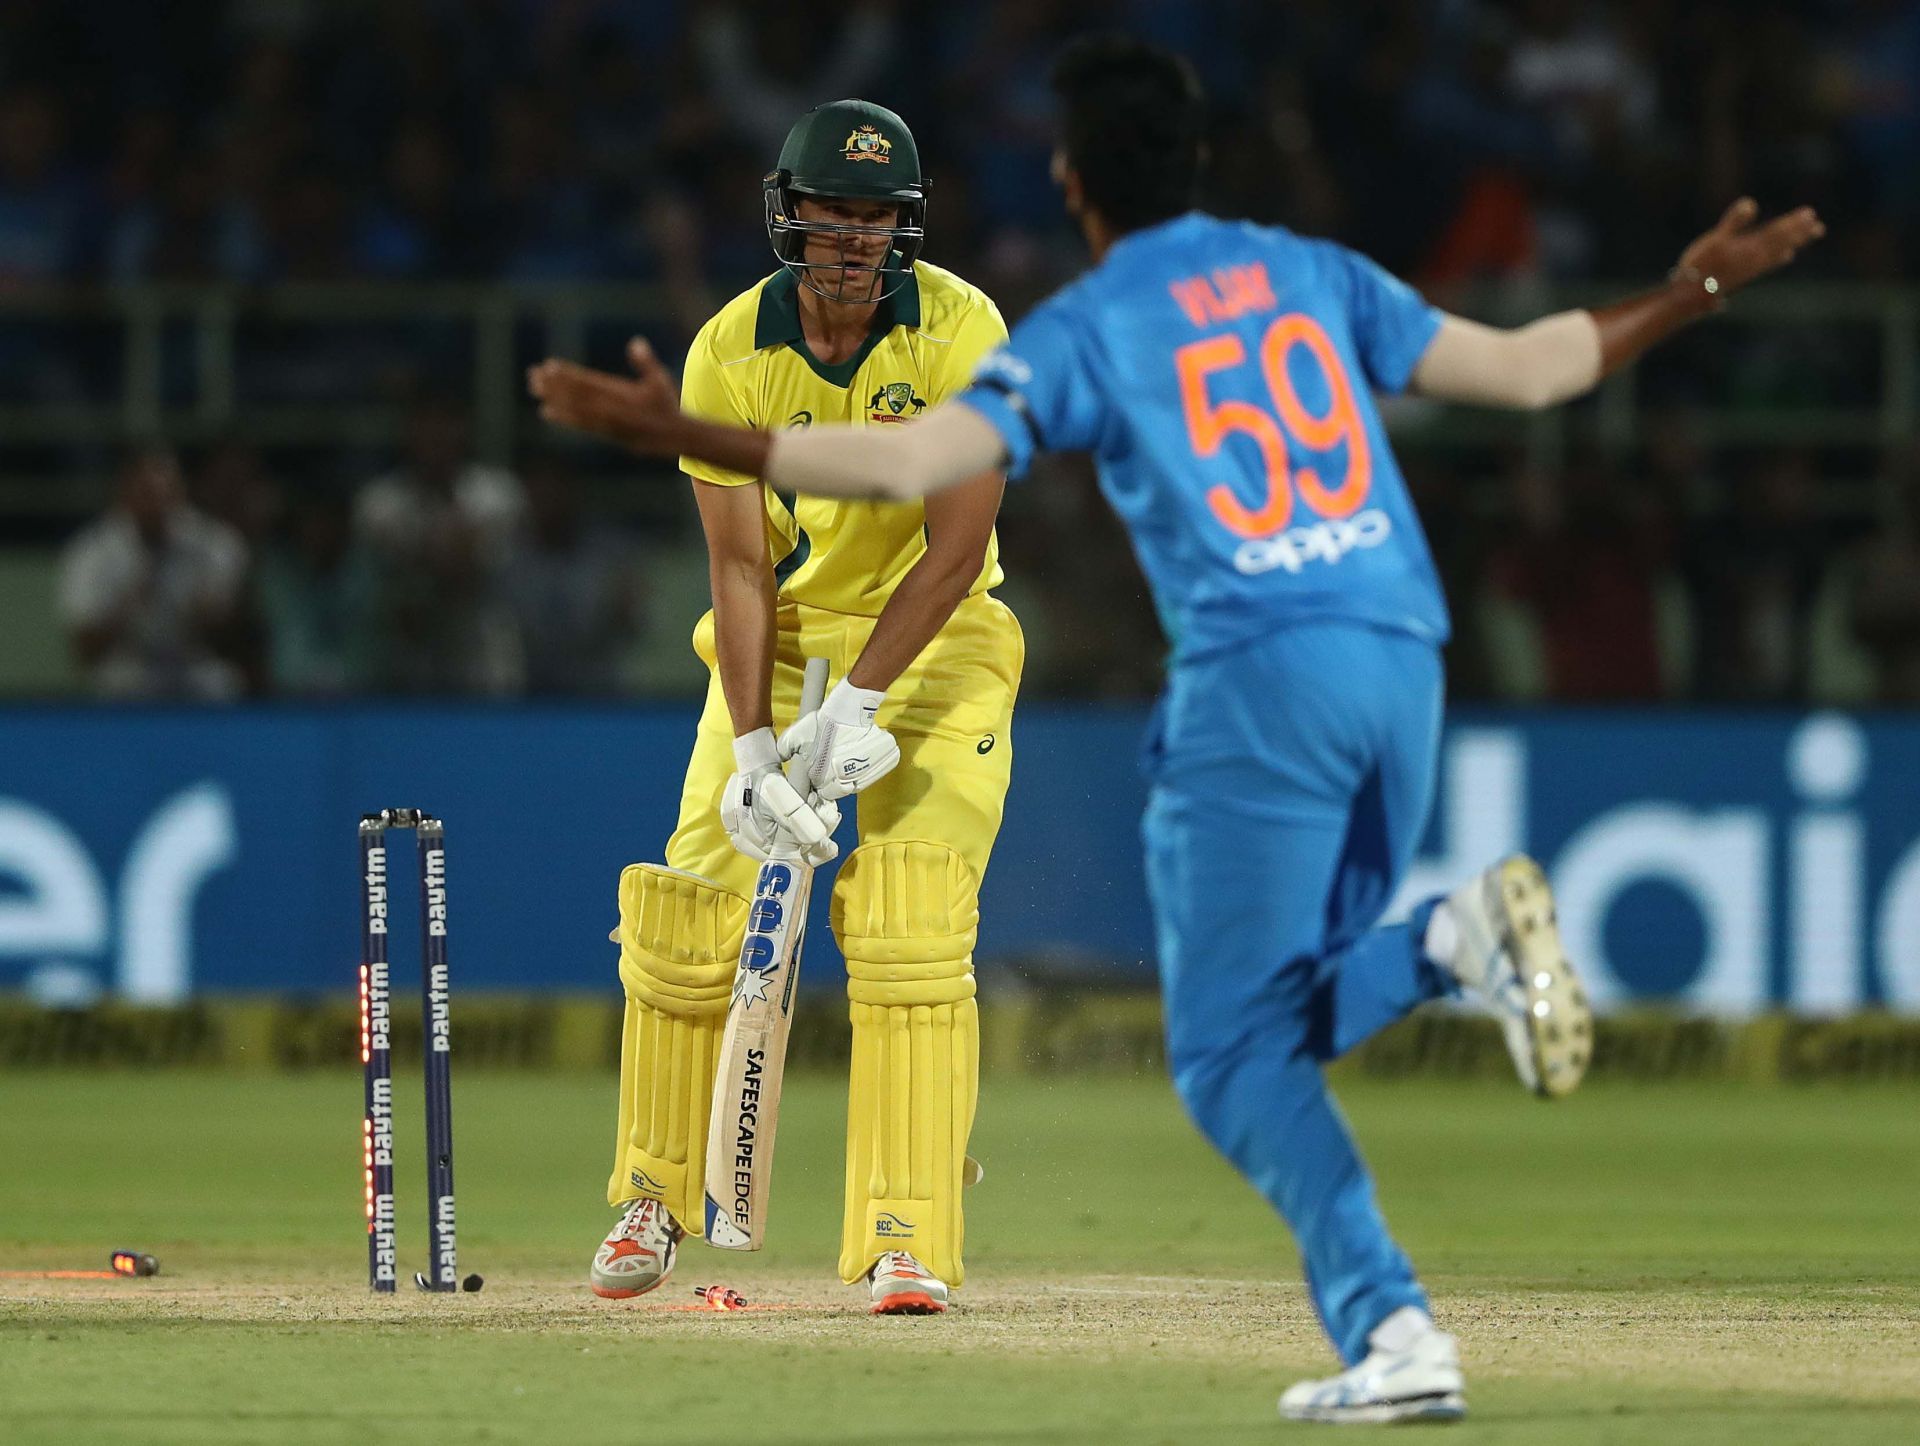 Nathan Coulter-Nile is bowled by Jasprit Bumrah during 2019 Visakhapatnam T20I. Pic: Getty Images